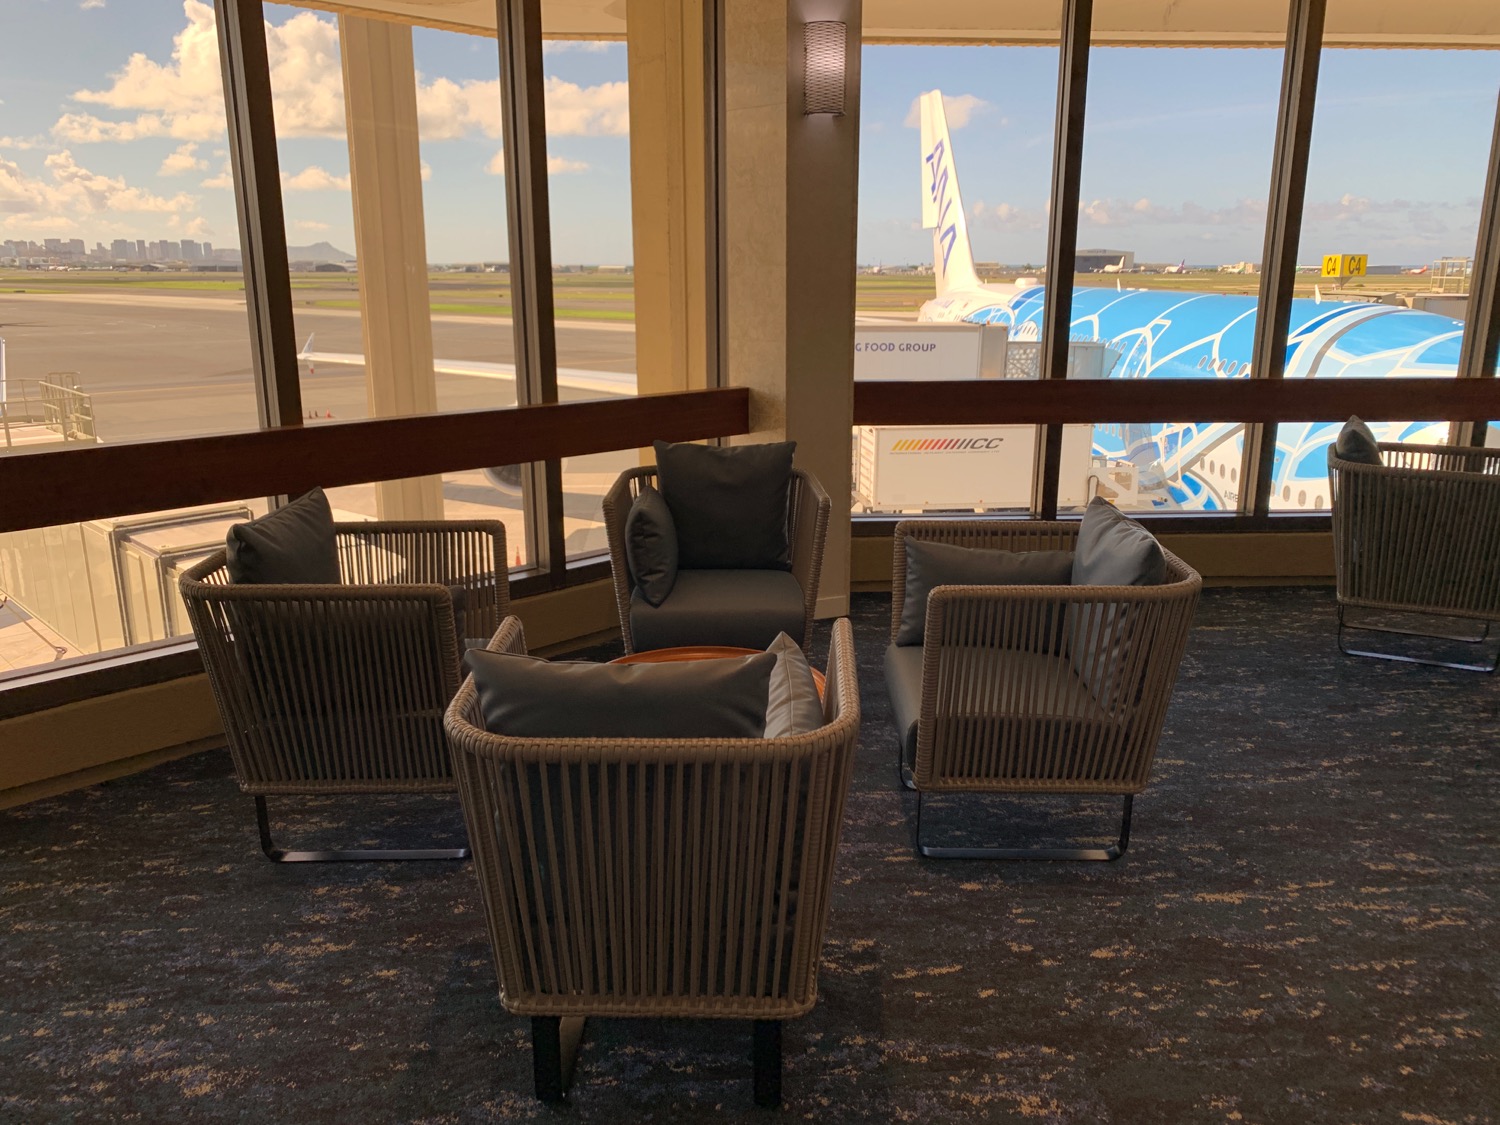 a group of chairs in a room with windows and a plane in the background